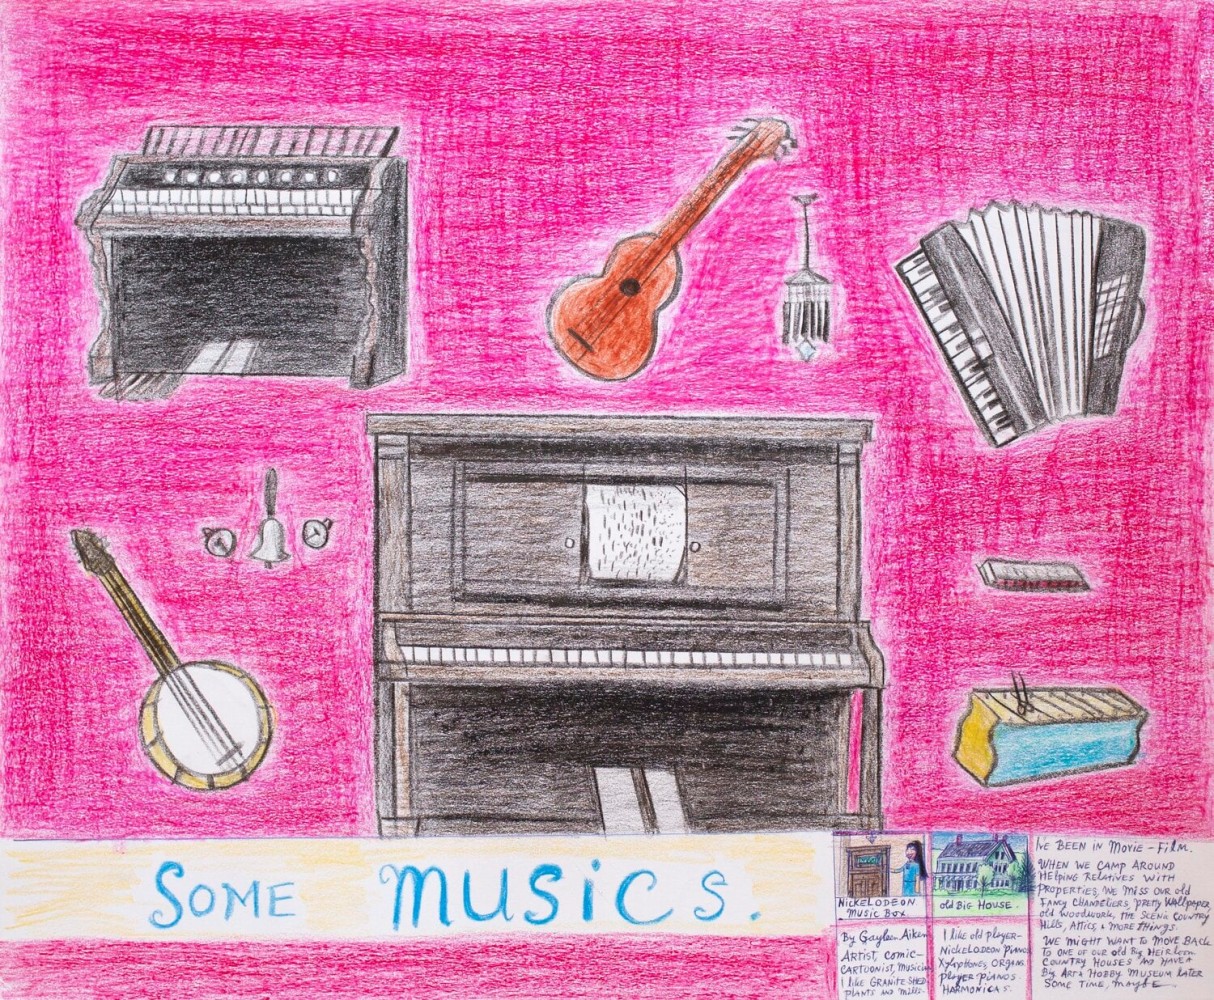 Gayleen Aiken
Some musics., 1994
Colored pencil, ballpoint pen, and crayon on paper
14 x 17 inches